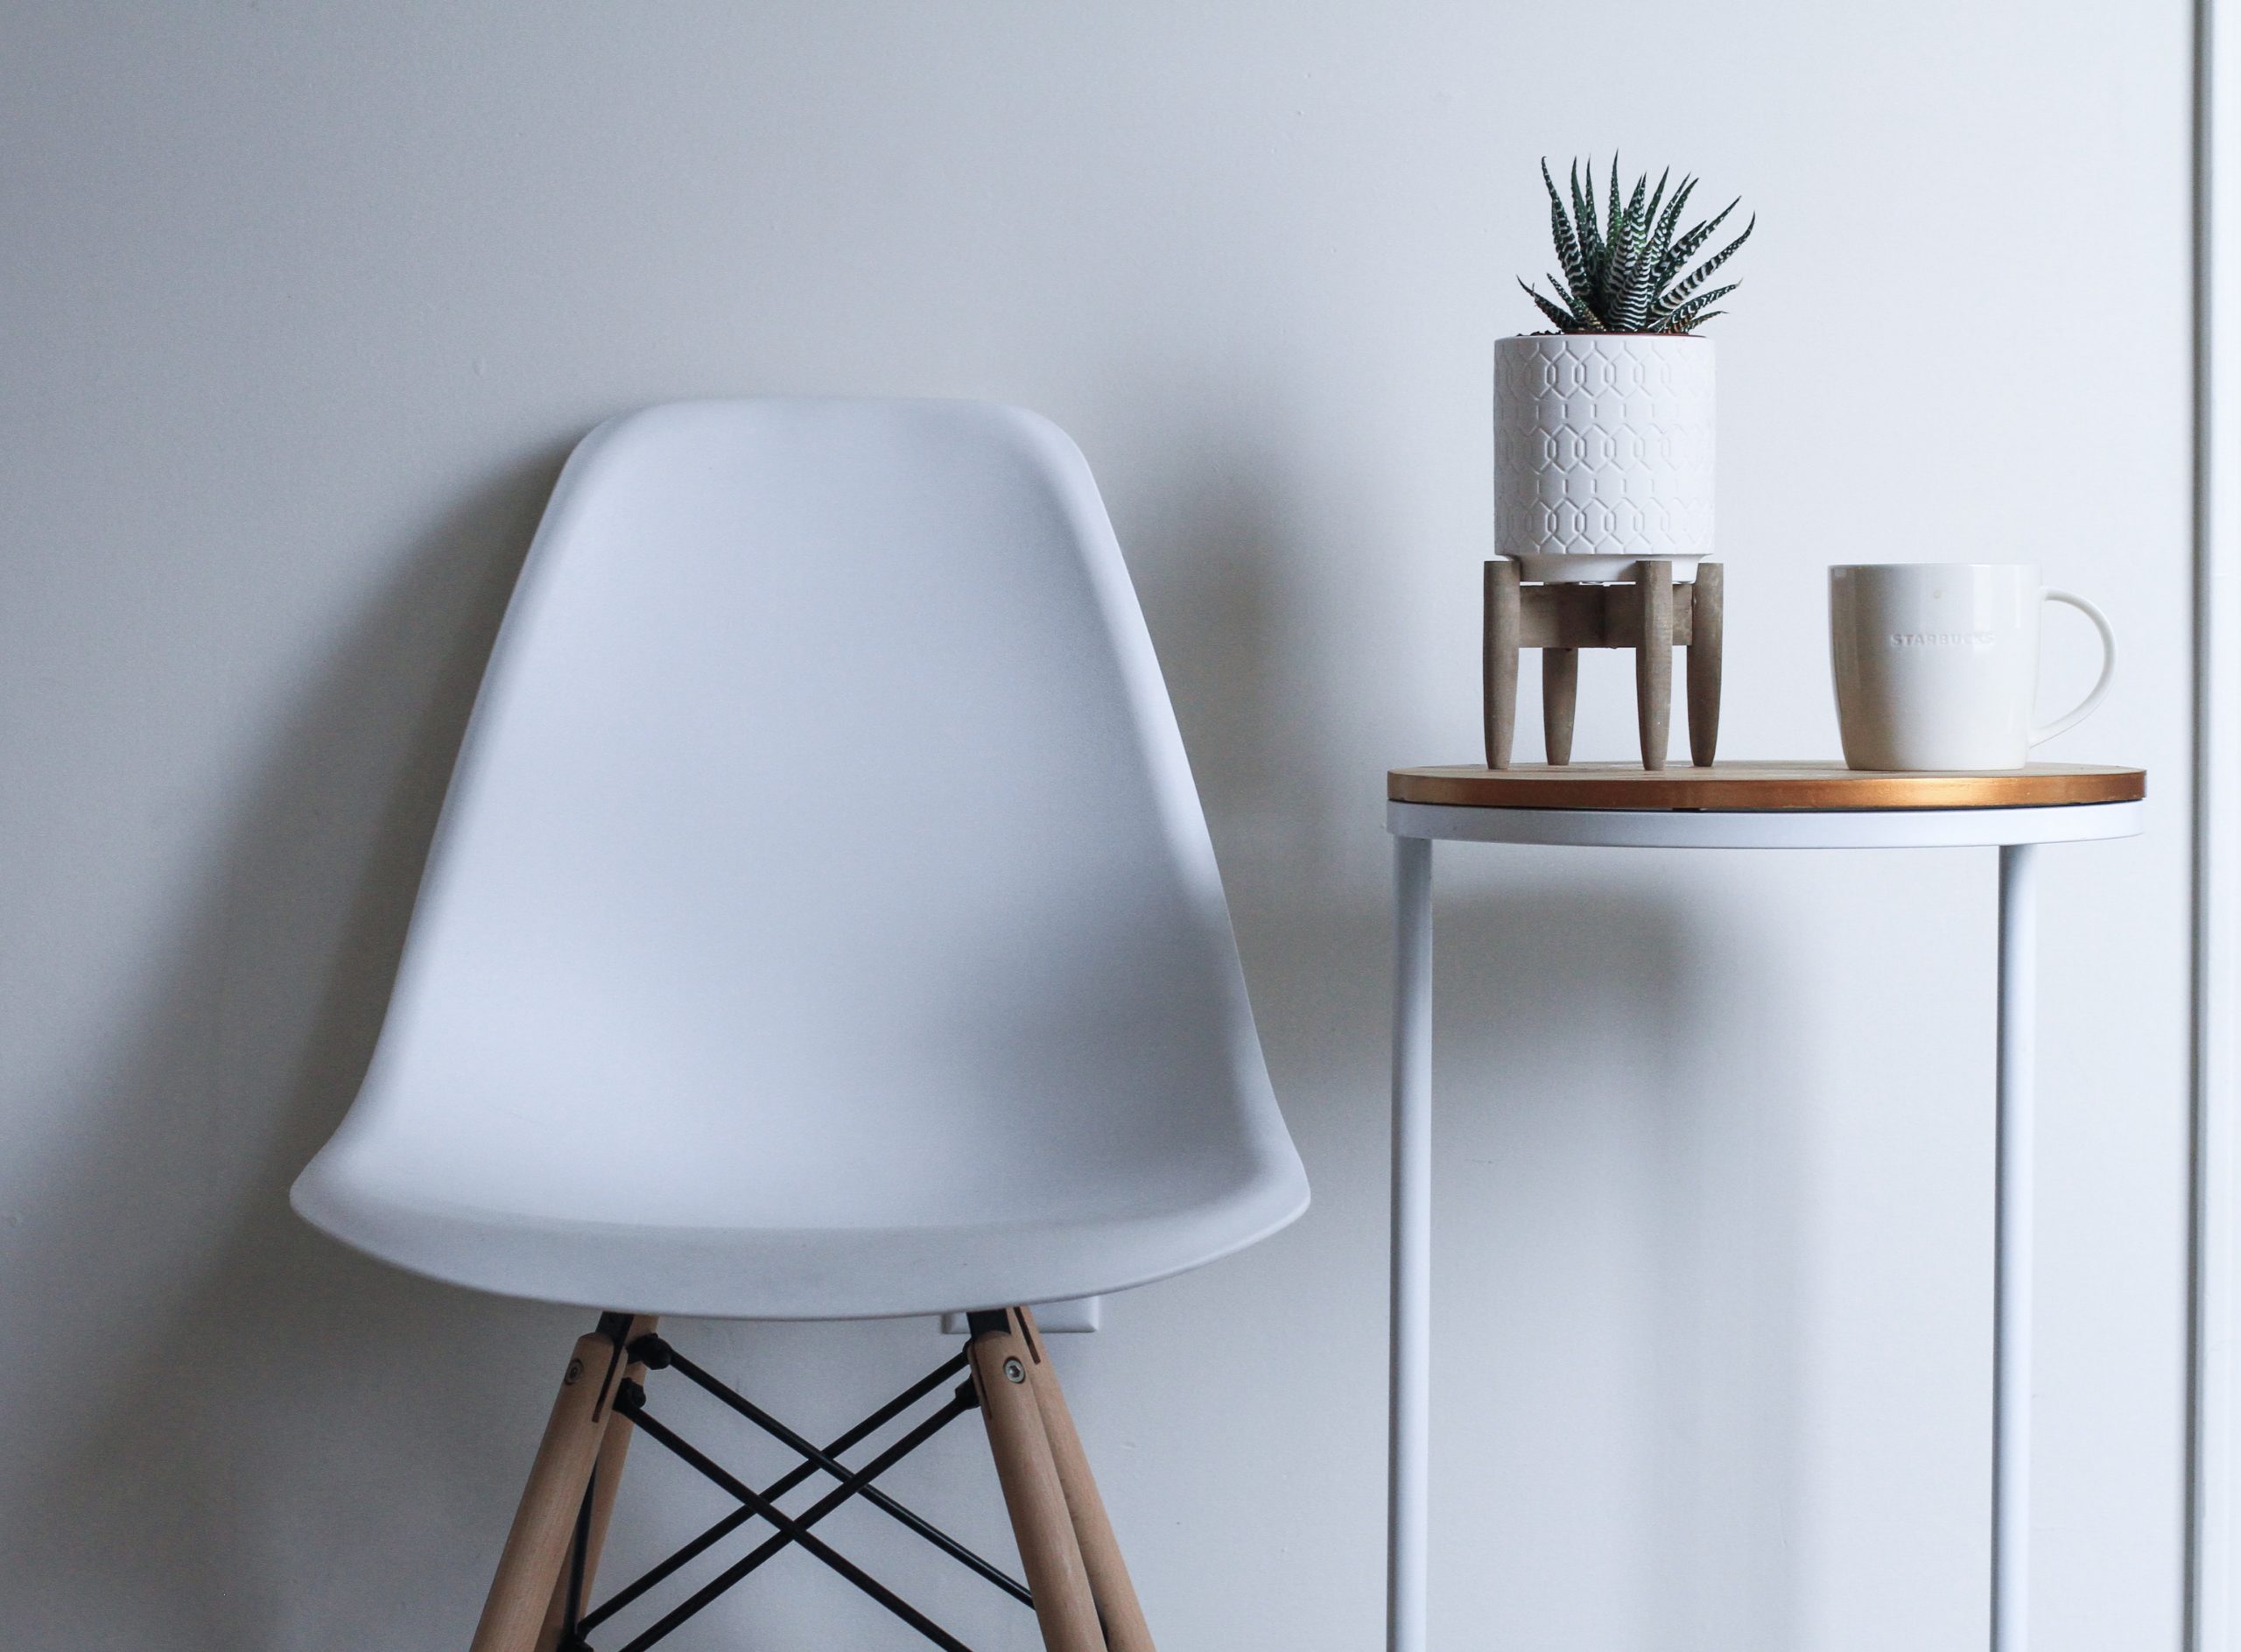 The Importance of Product Photography In Selling Furniture